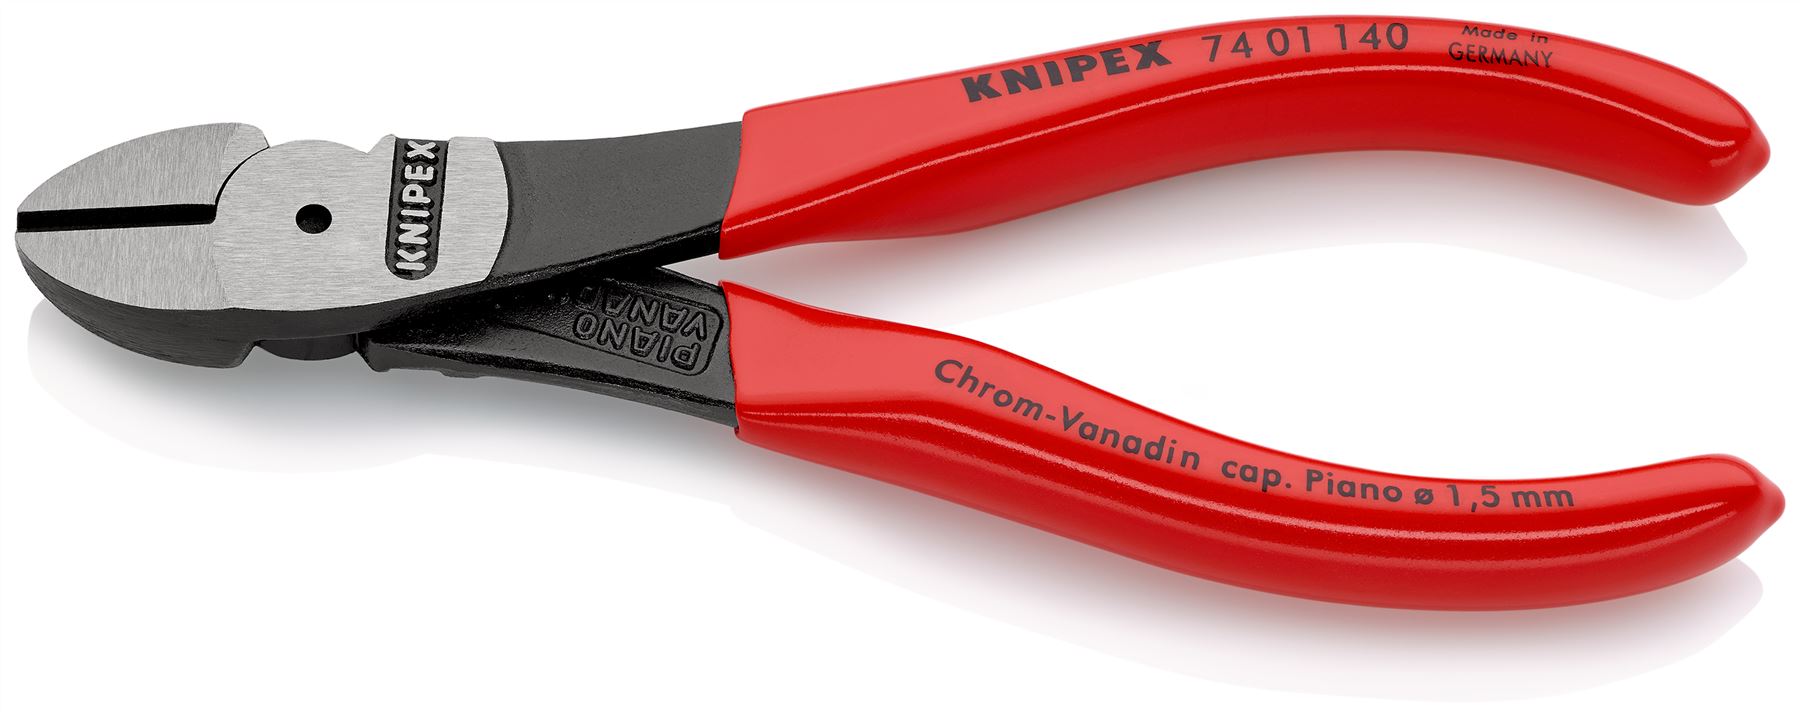 KNIPEX Diagonal Cutting Pliers High Leverage Side Cutters 140mm Plastic Coated Handles 74 01 140